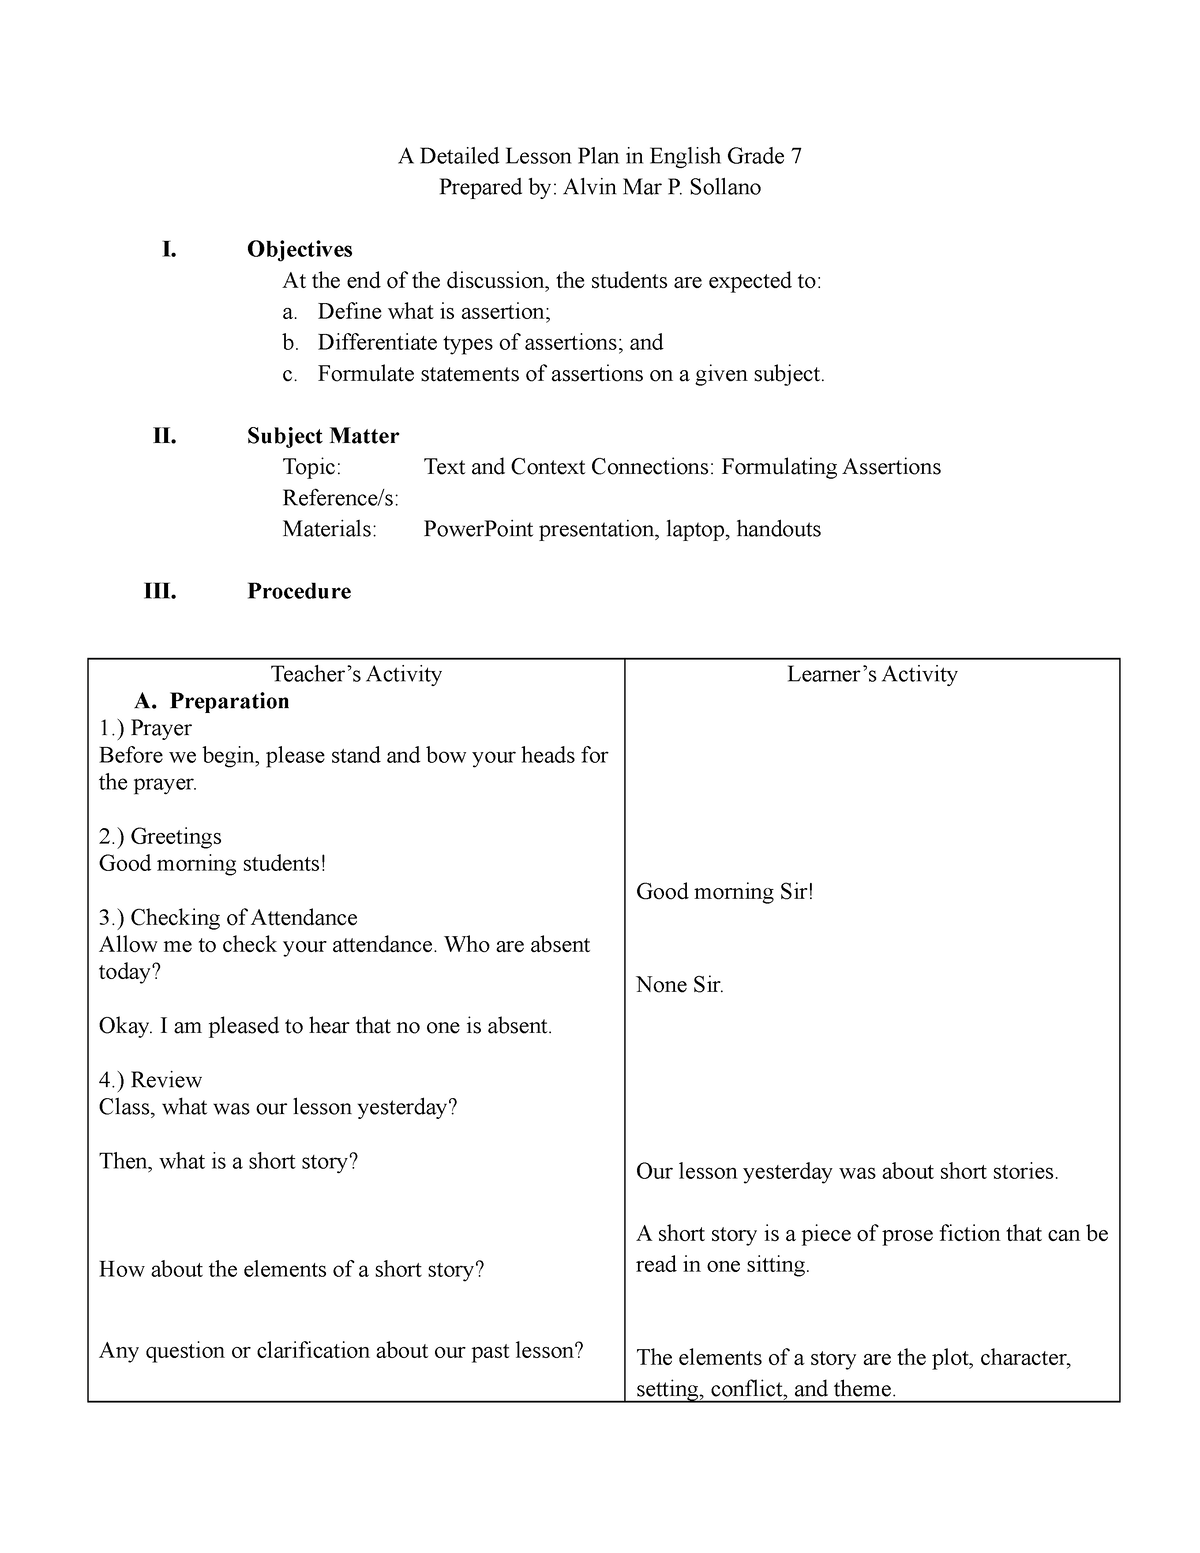 formulating-assertions-a-detailed-lesson-plan-in-english-grade-7